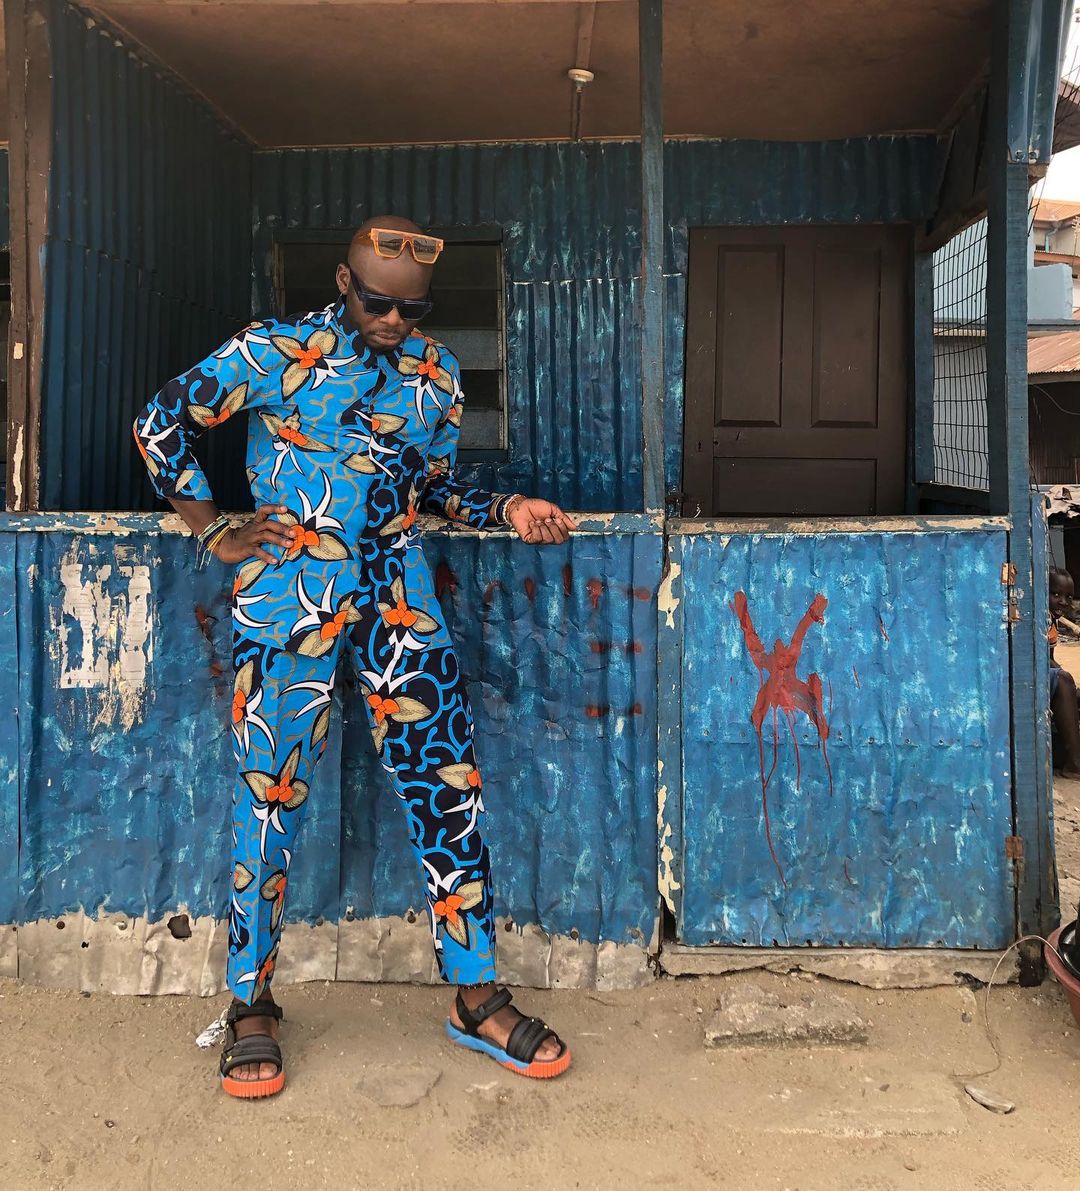 best-dressed-male-celebrities-africa-details-style-rave